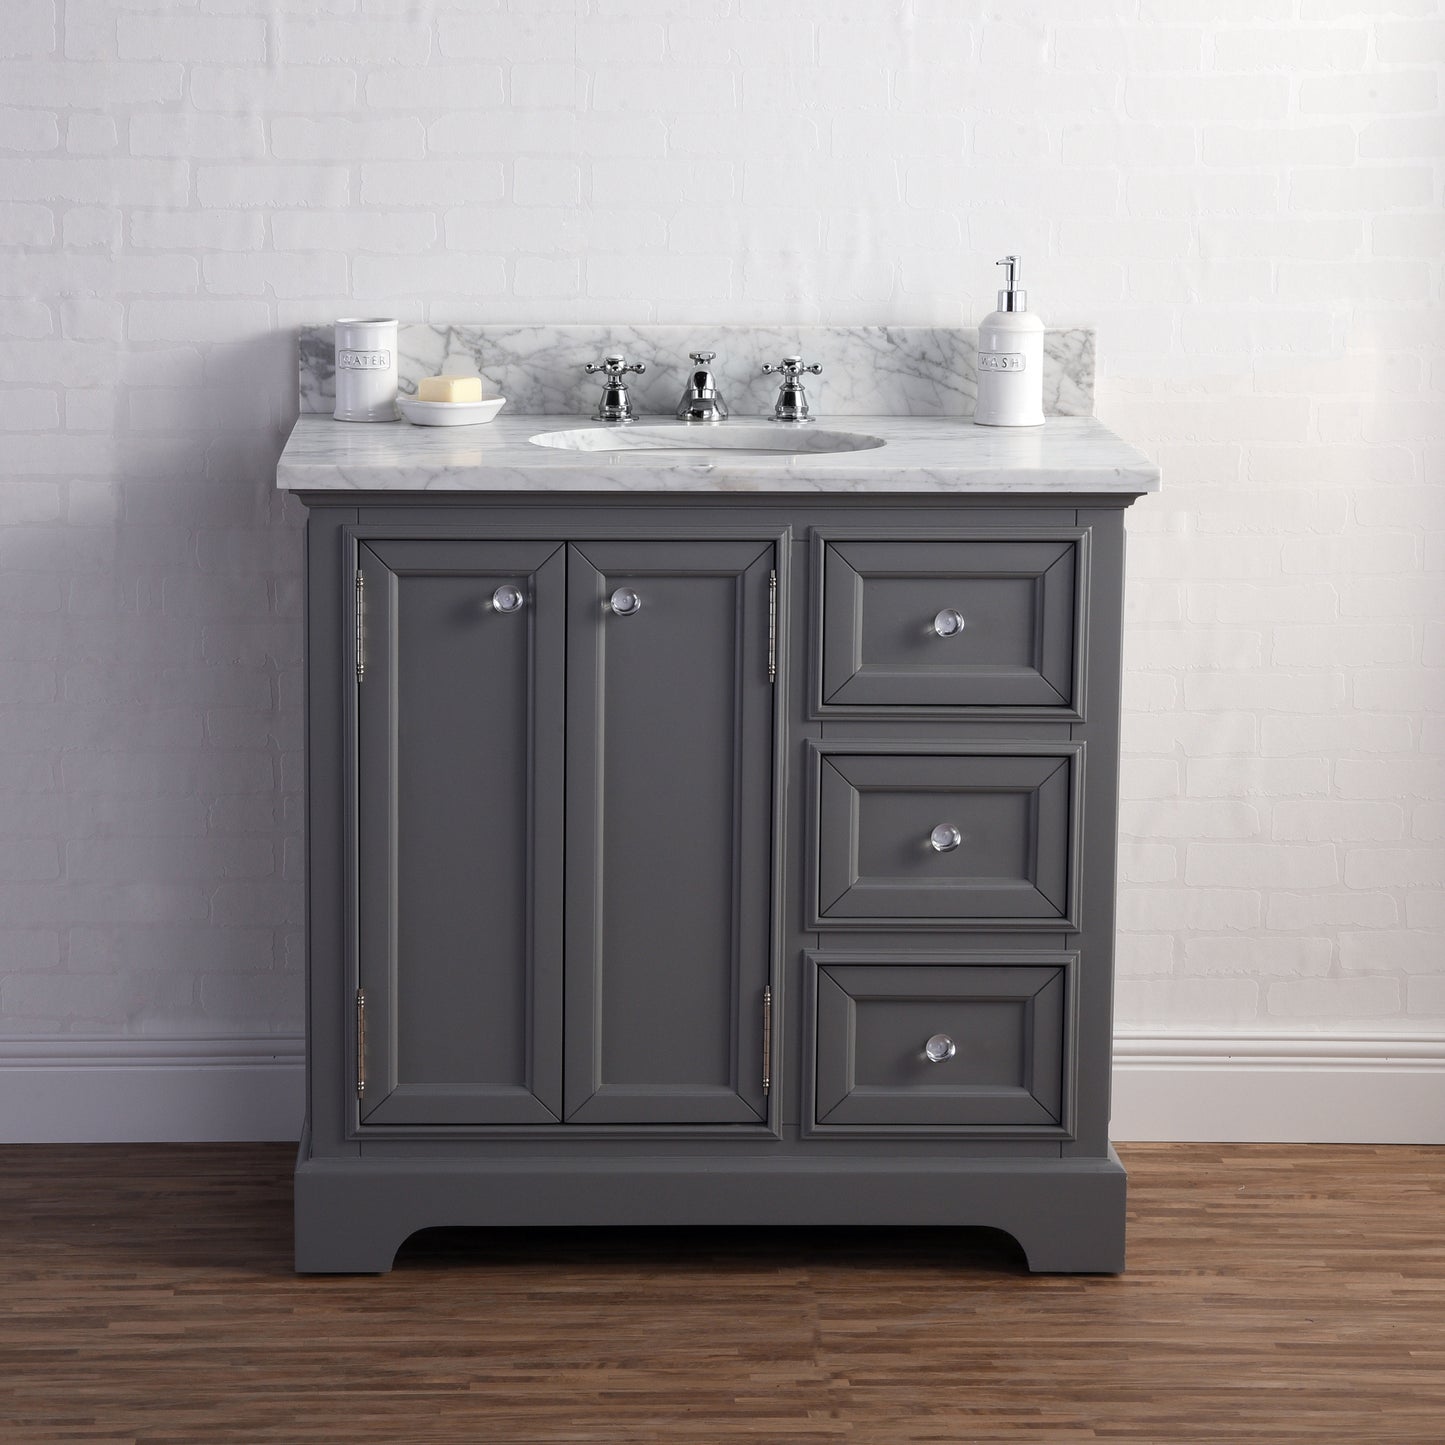 Water Creation 36 Inch Wide Single Sink Carrara Marble Bathroom Vanity With Faucets From The Derby Collection - Luxe Bathroom Vanities